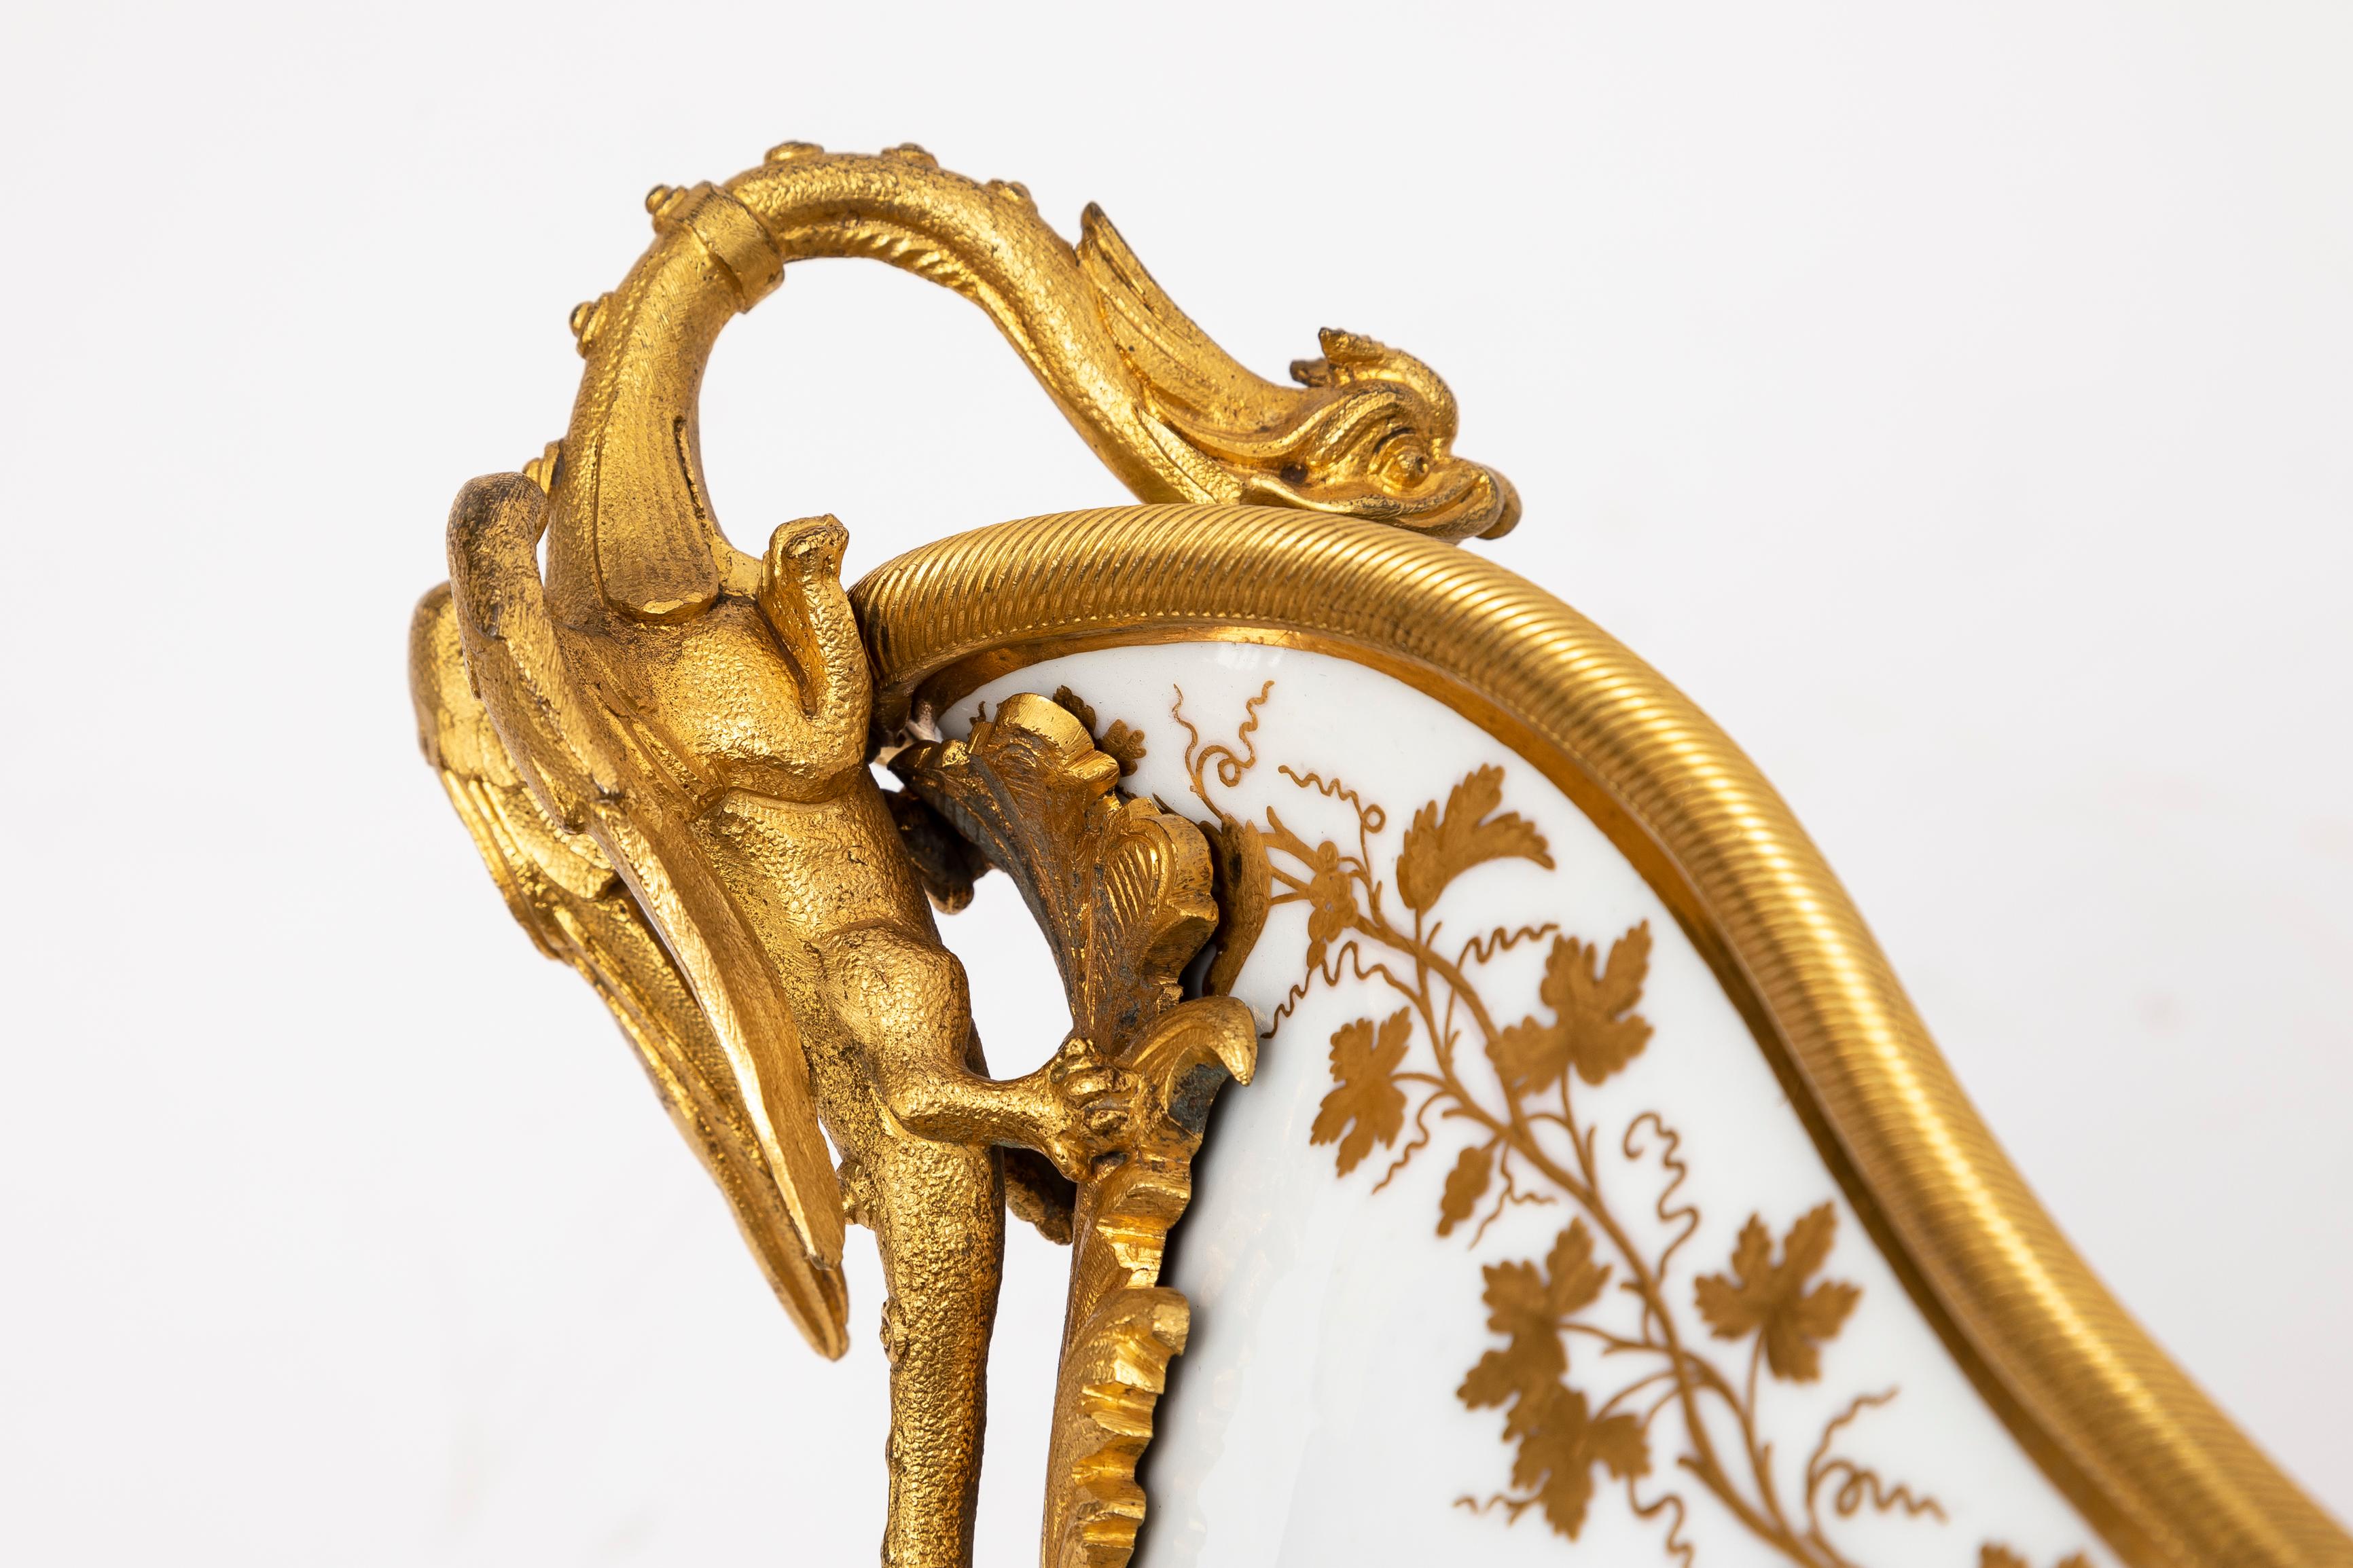 An 18th C. French Ormolu Mounted Sevres Porcelain Centerpiece w/ Dragon Handles For Sale 3